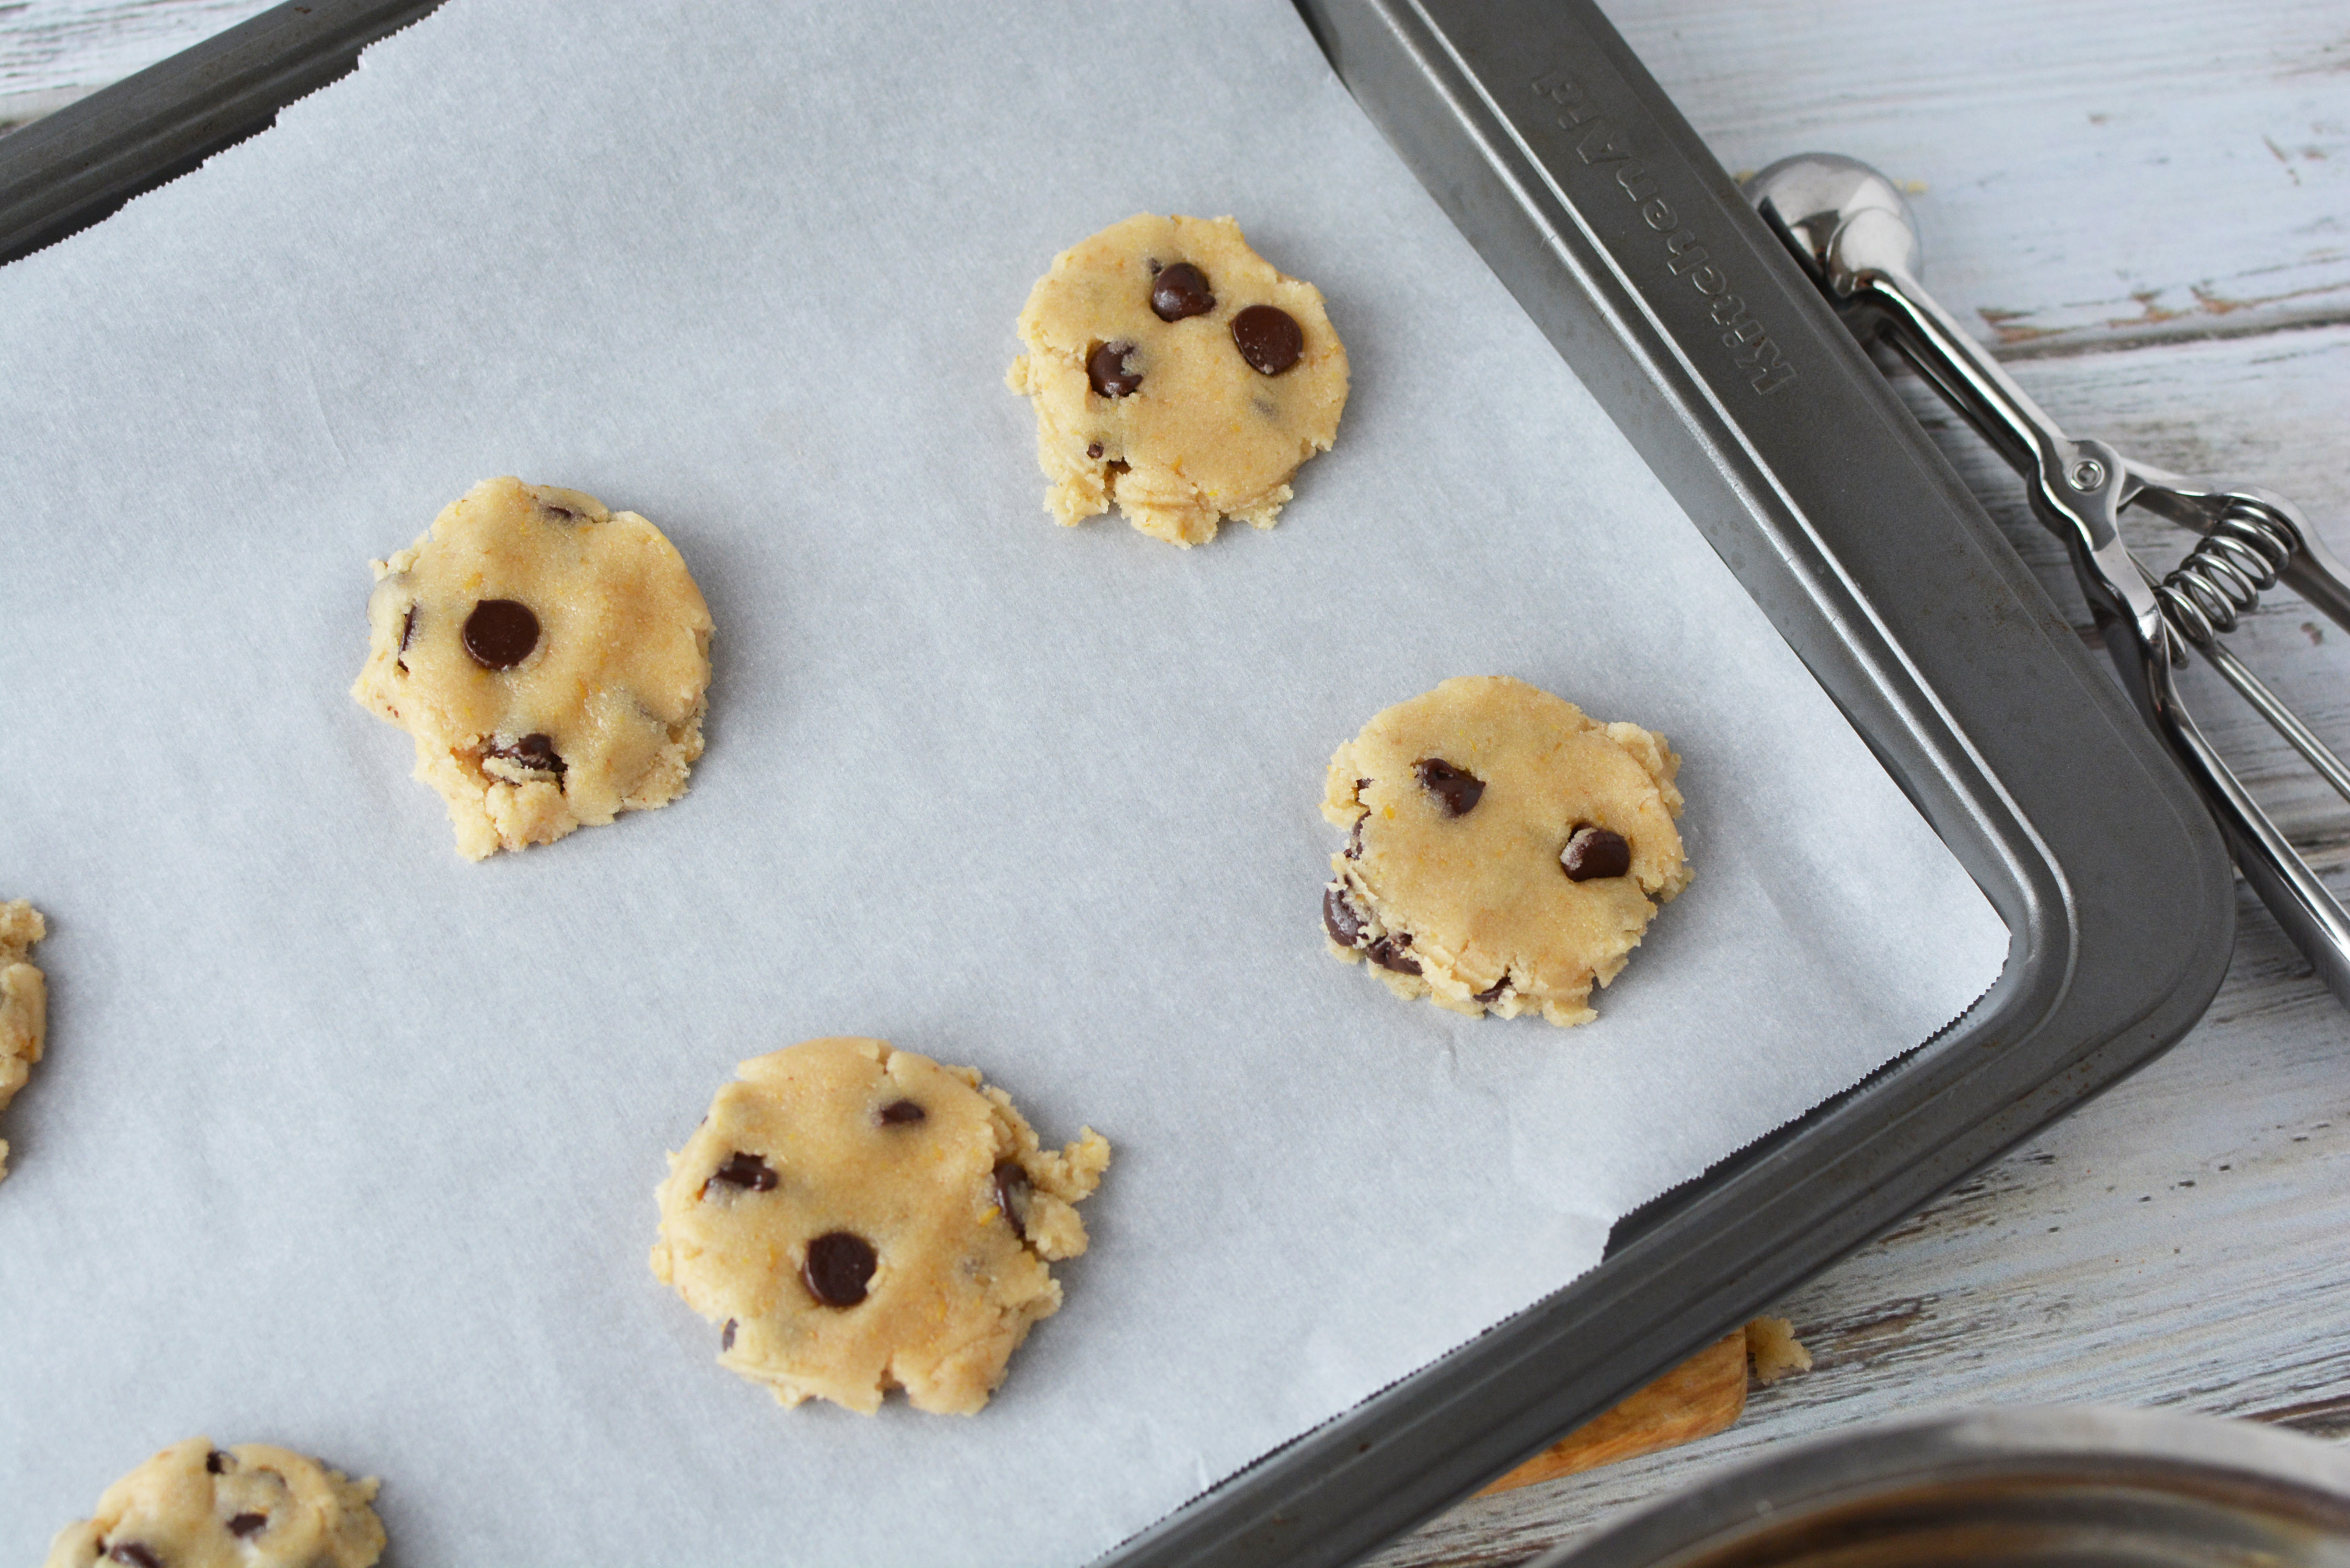 Gluten free egg free chocolate chip cookies|Ripped Jeans and Bifocals